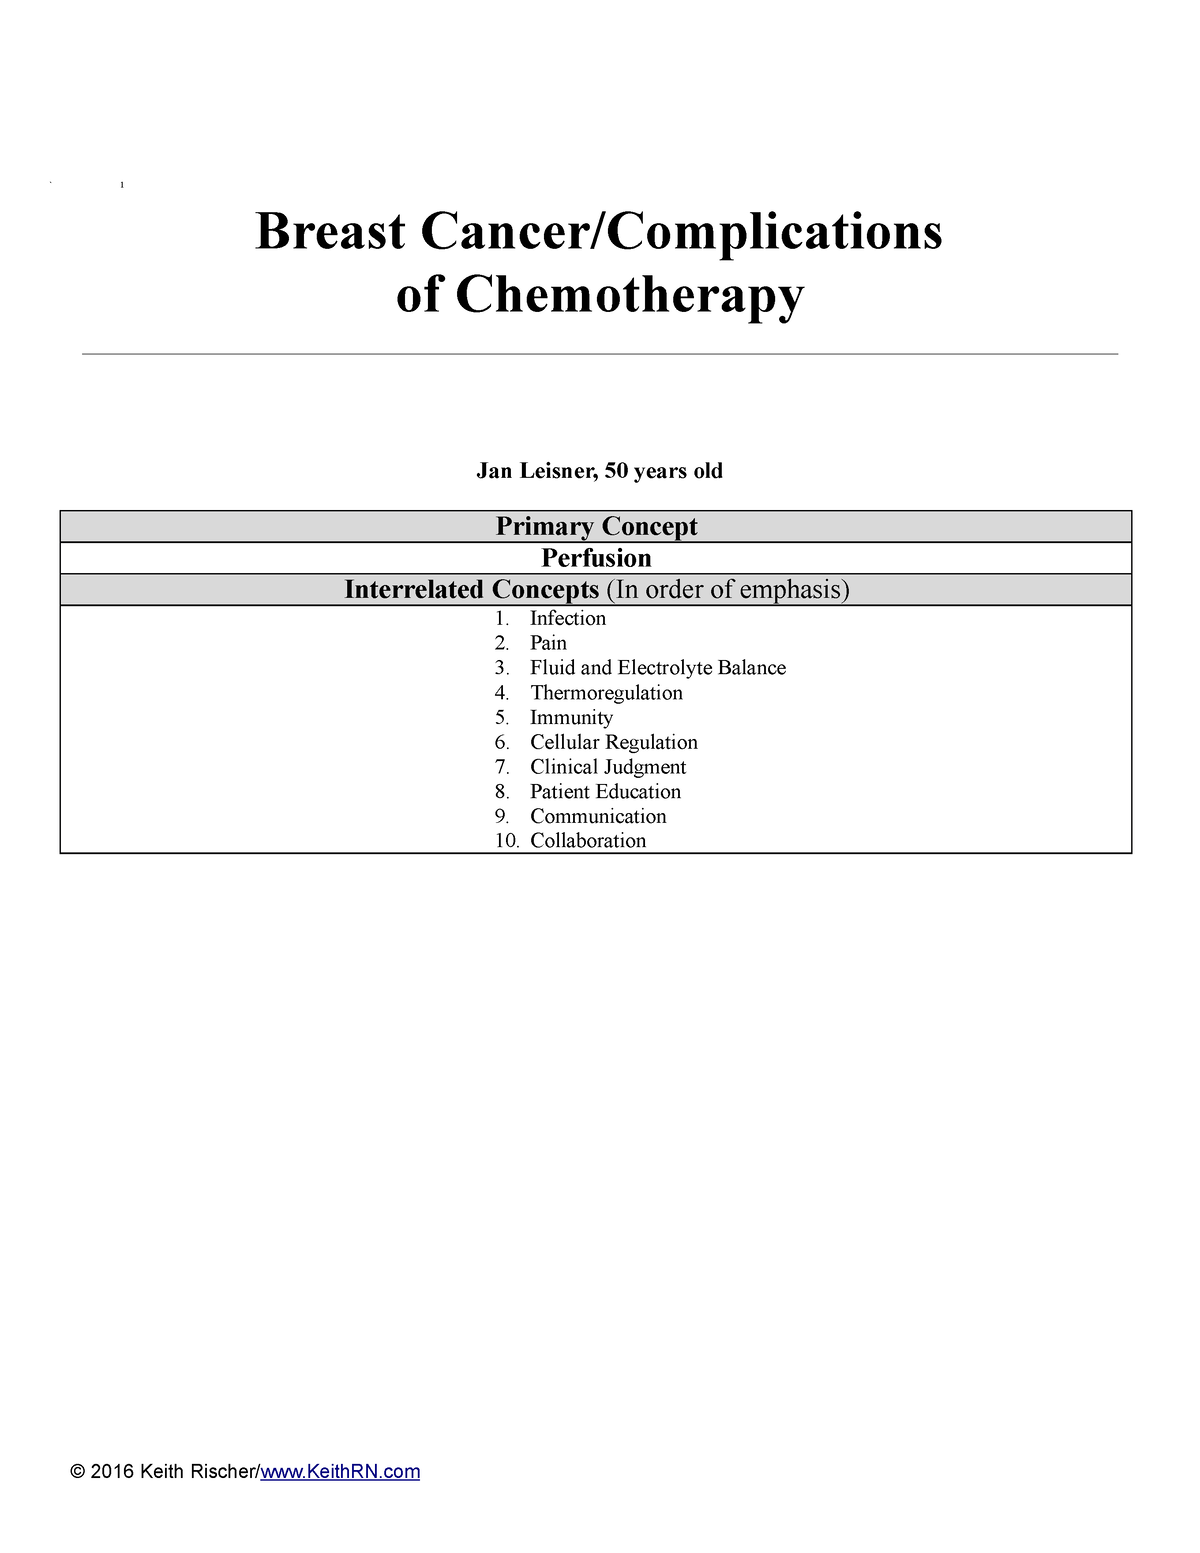 keith rn breast cancer case study